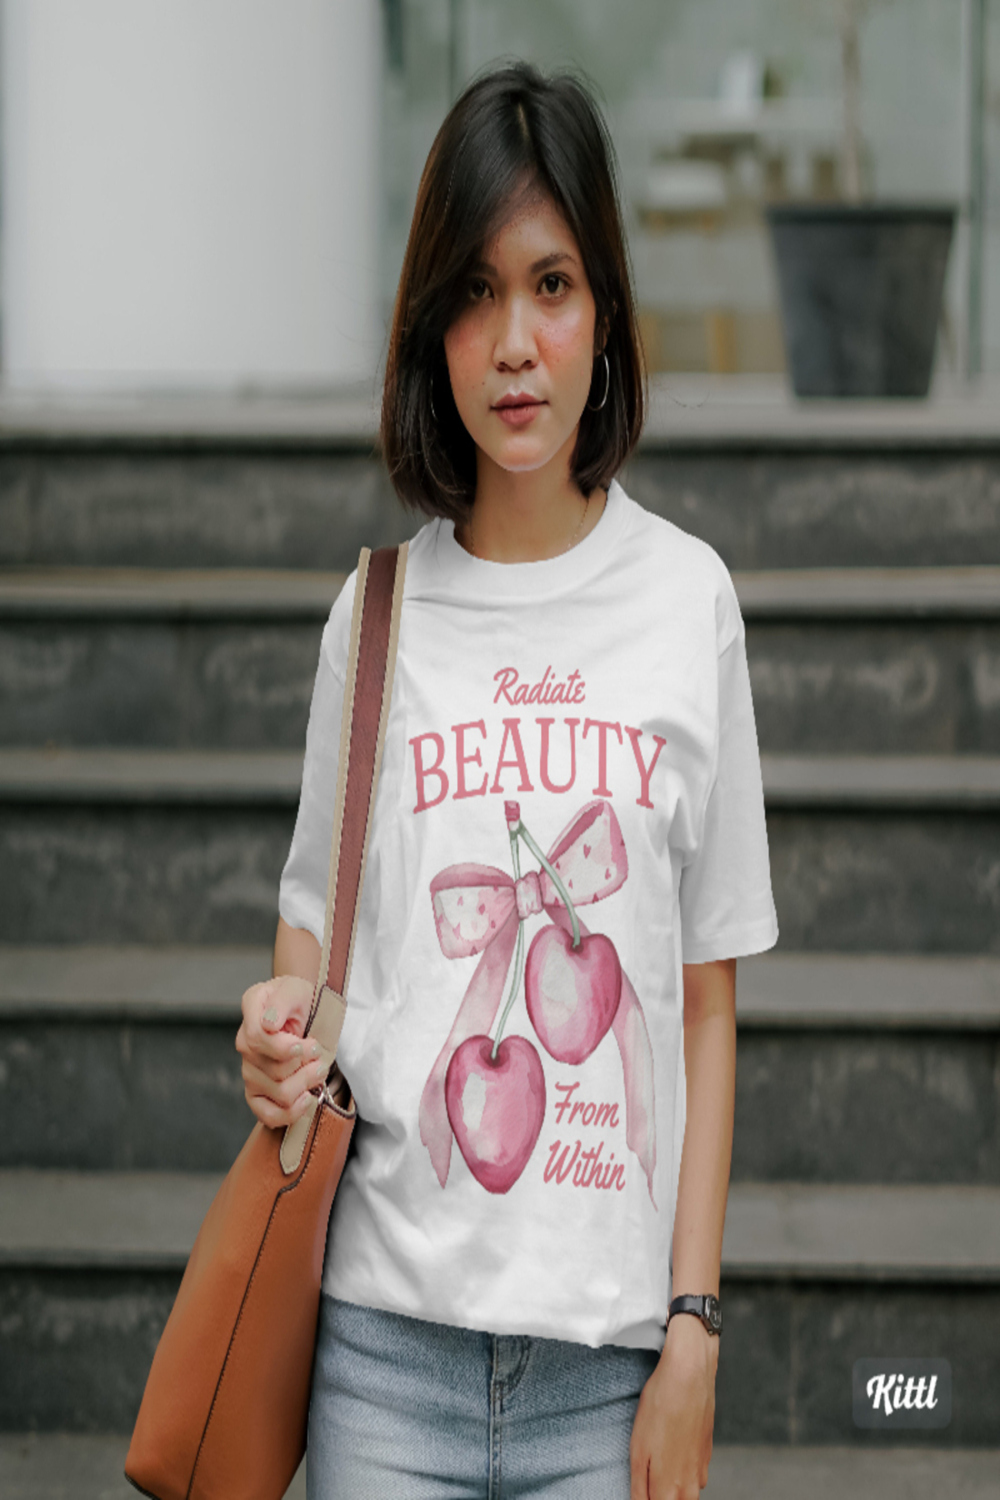 A t shirt for girls and woman pinterest preview image.